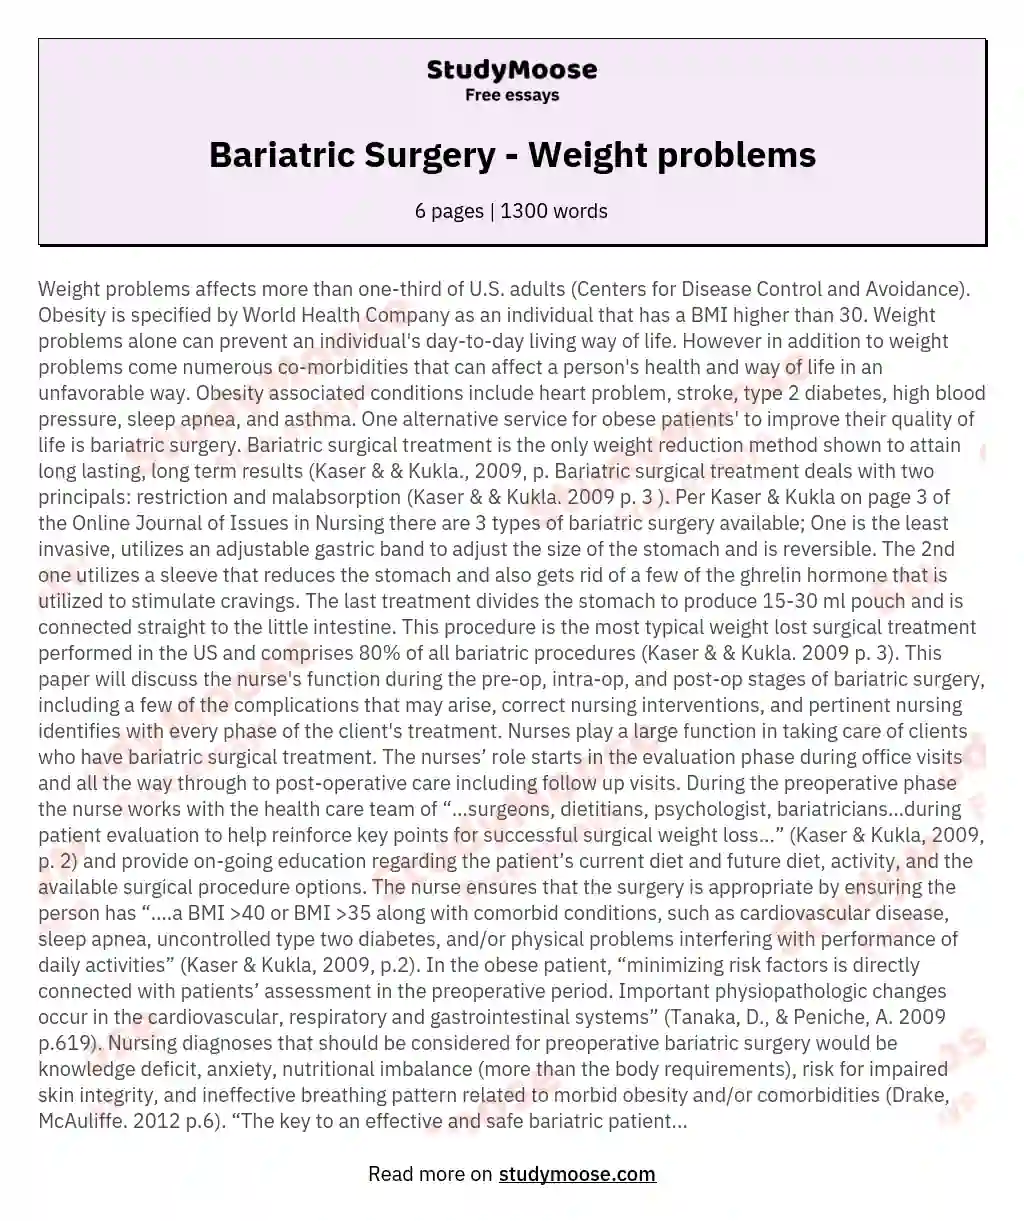 Bariatric Surgery - Weight problems essay